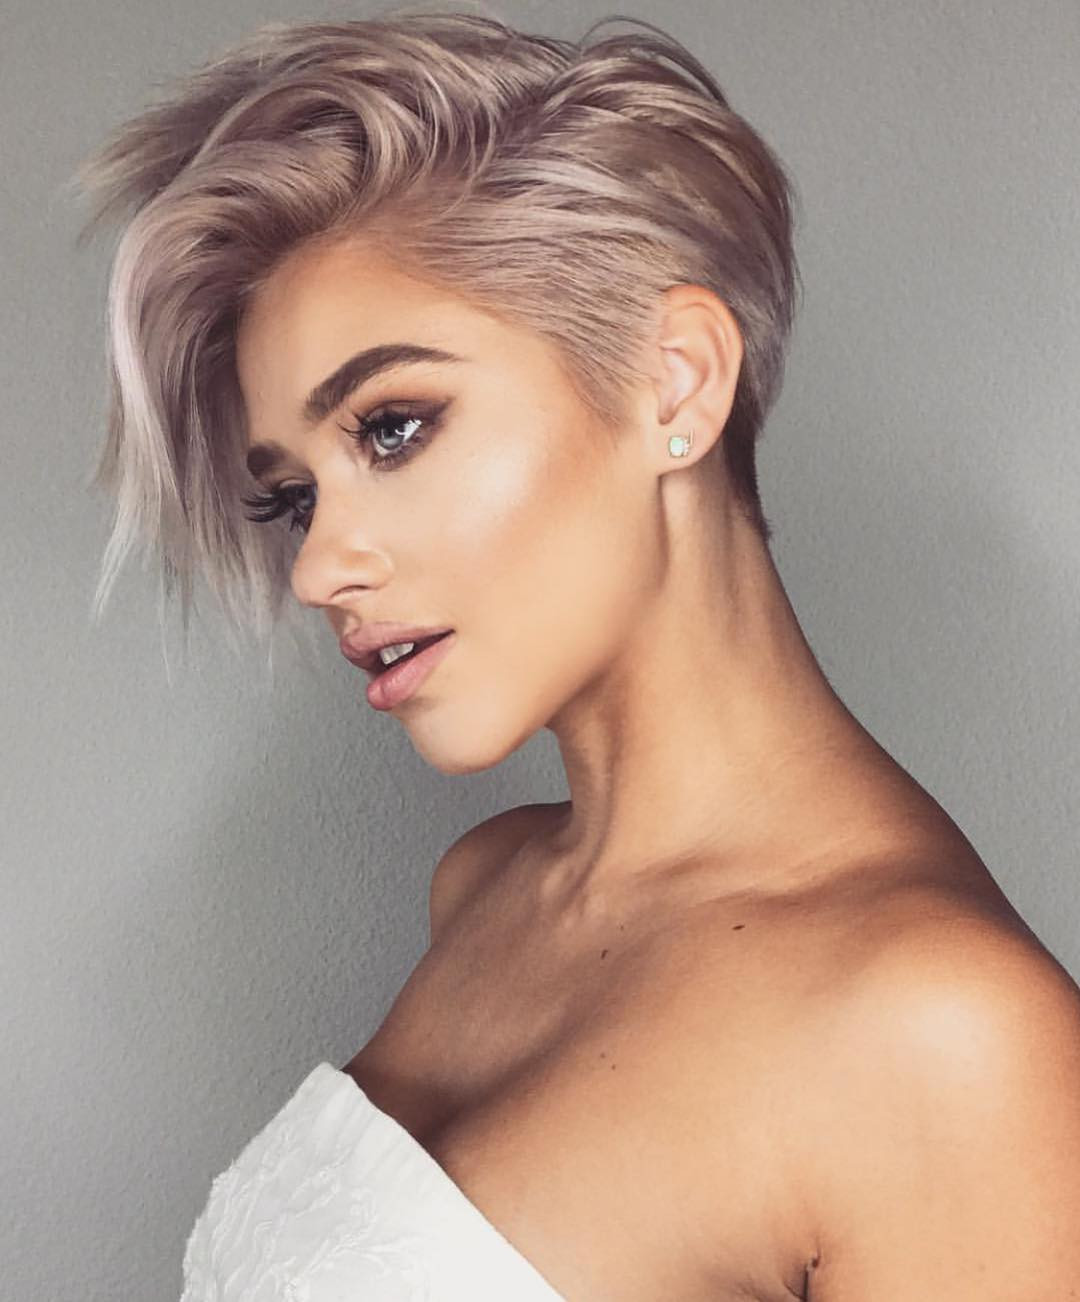 Hairstyles 2019 Female
 10 Trendy Very Short Haircuts for Female Cool Short Hair